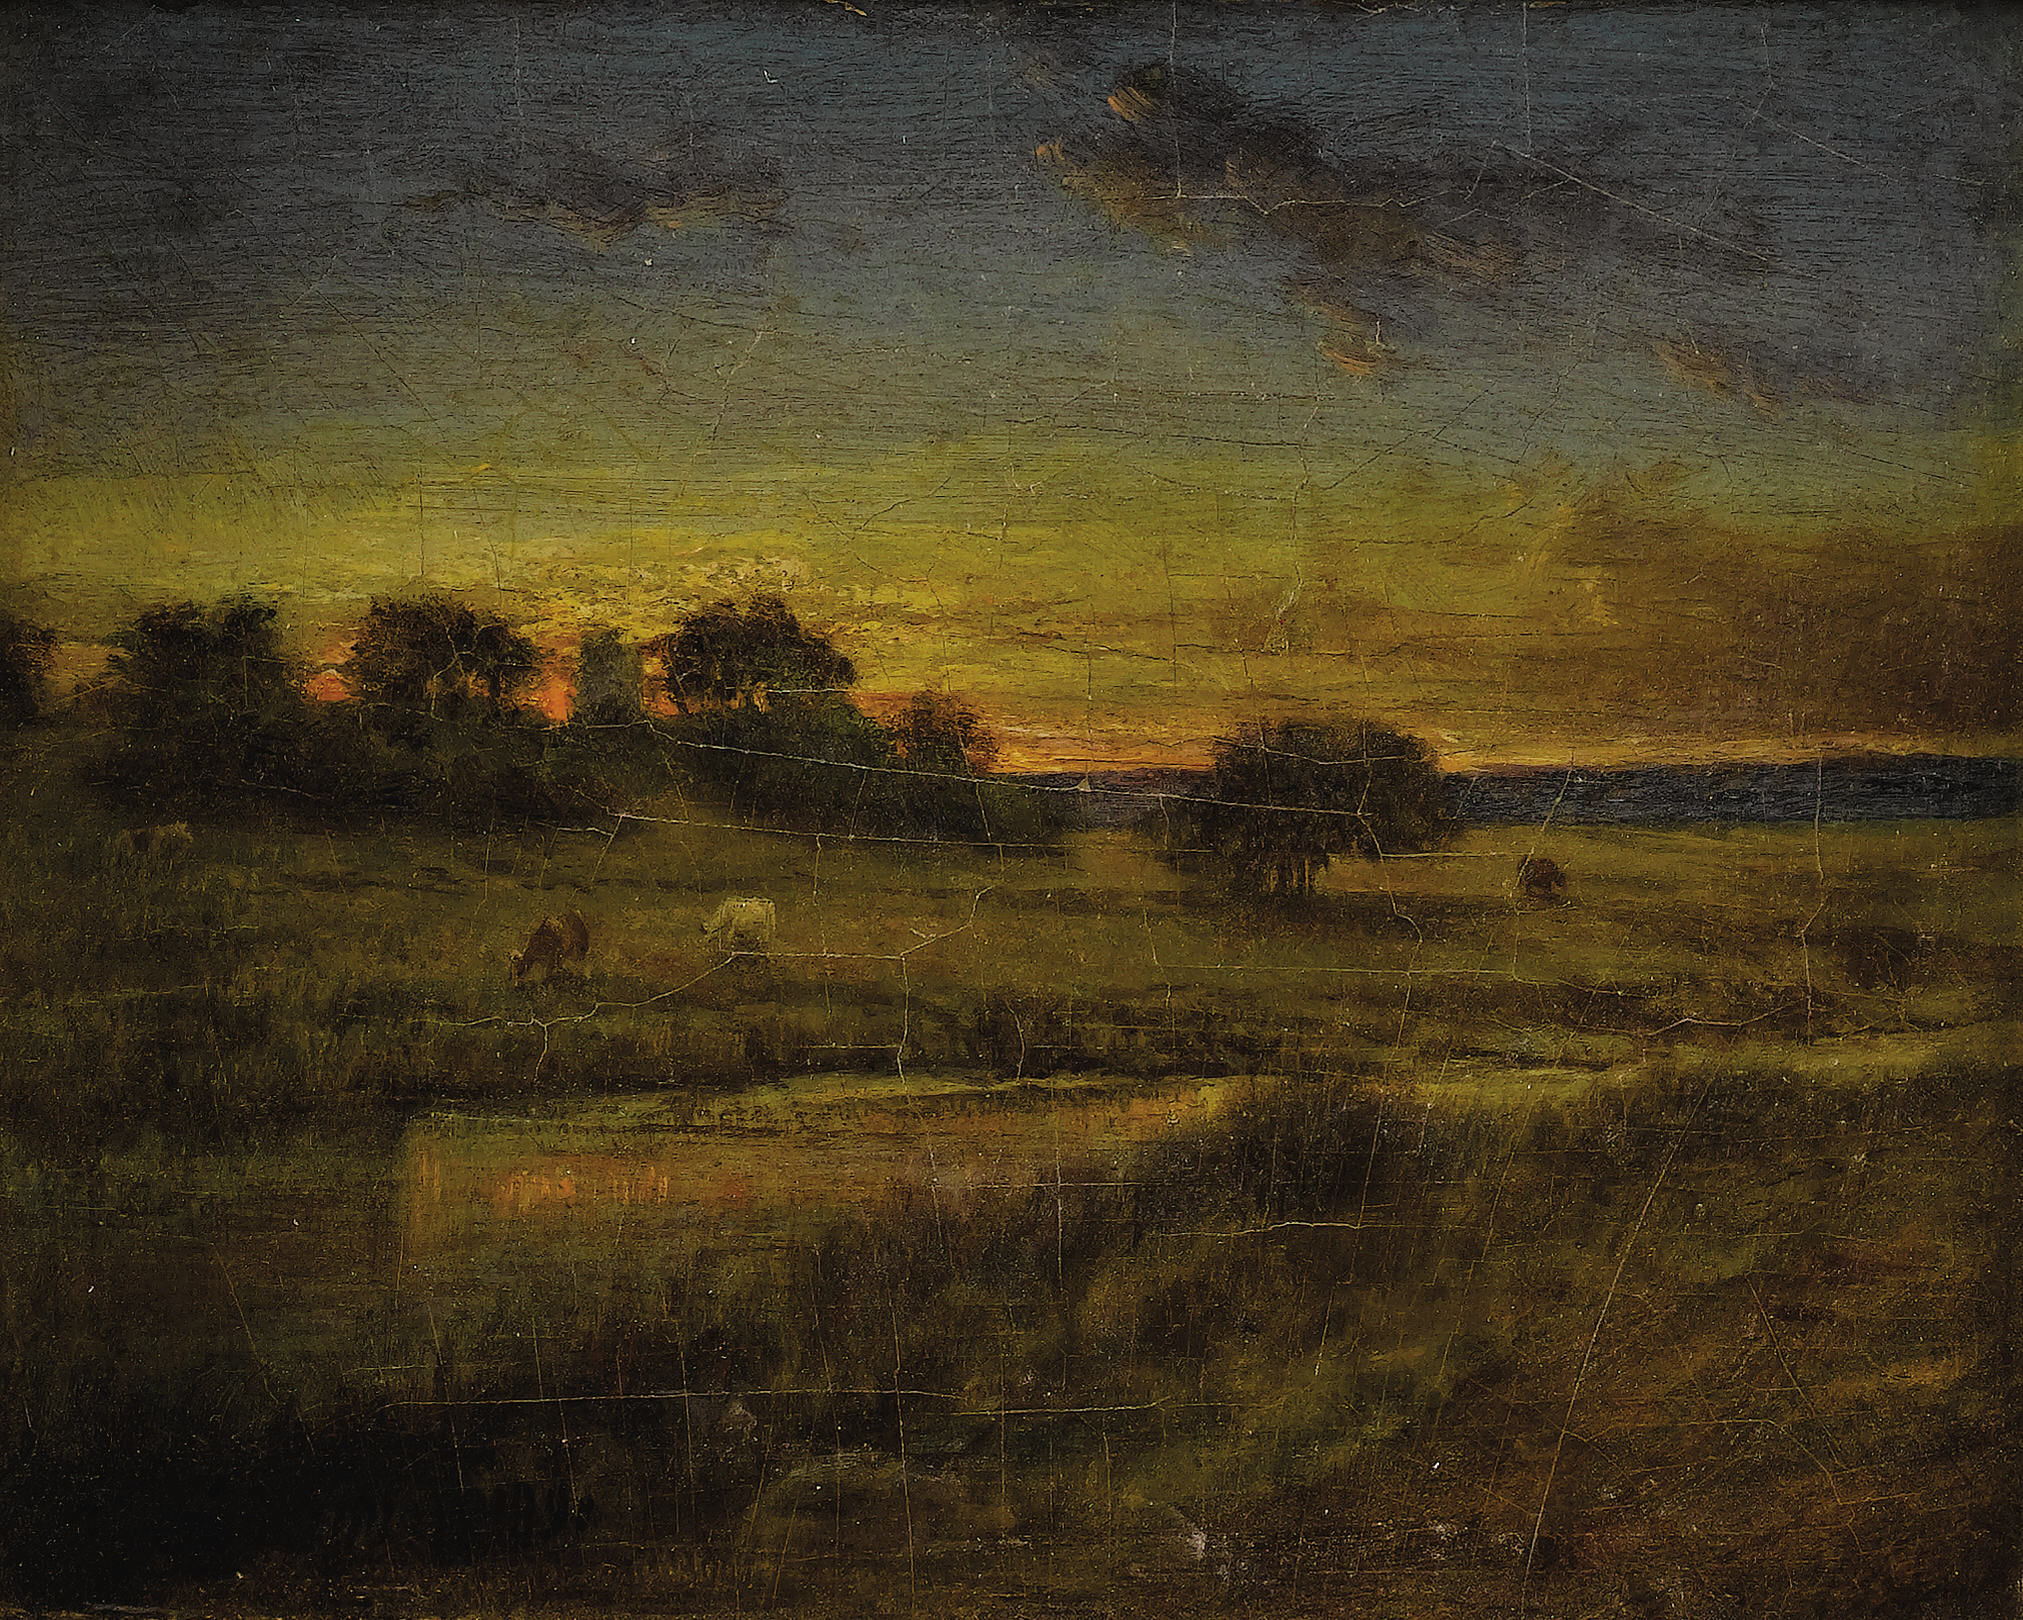 Pasture at dawn-George Inness-1891